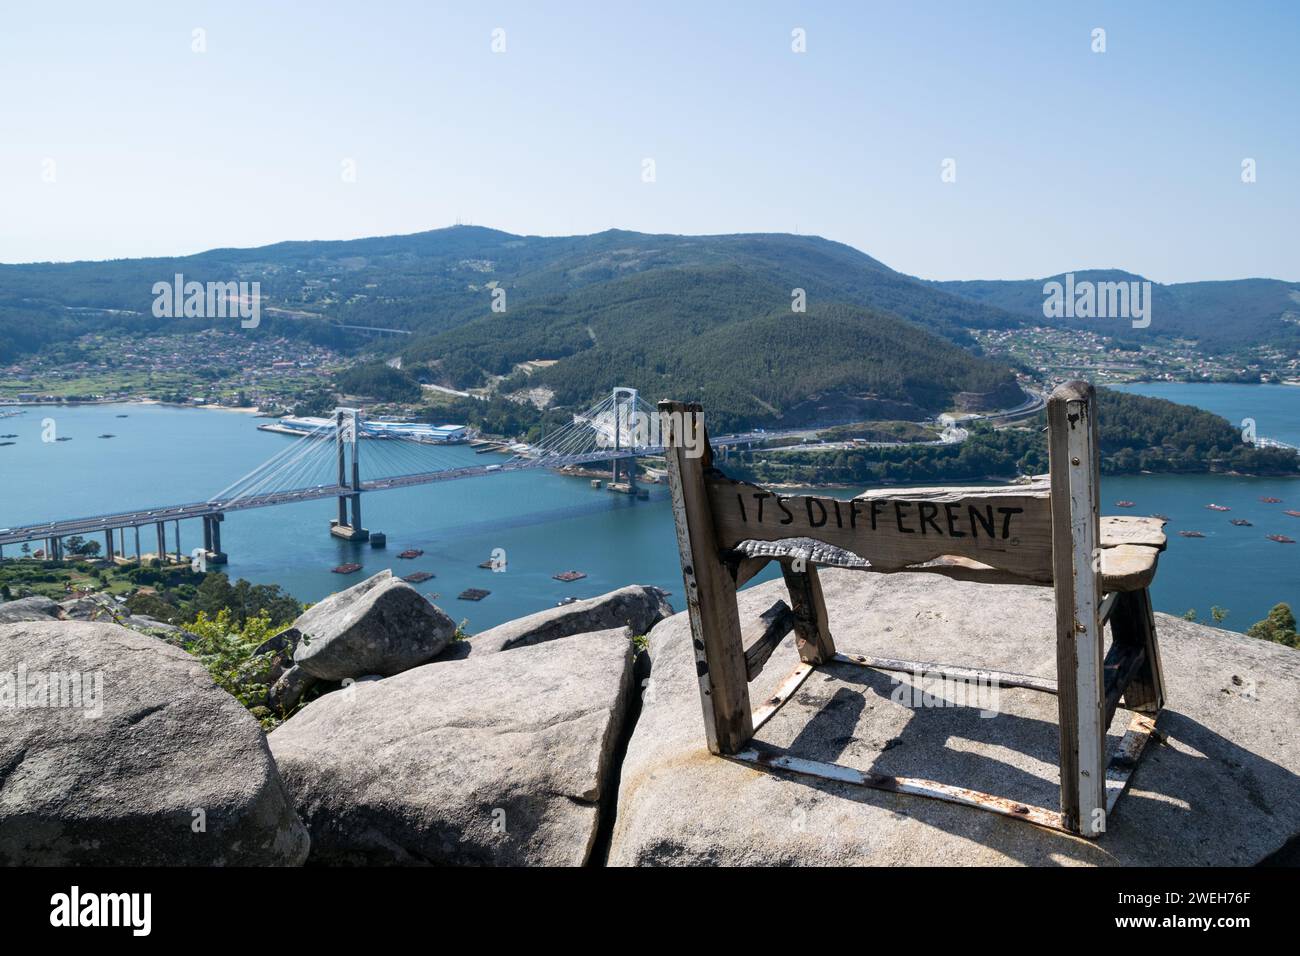 View of one of the so-called best bench in the world in Vigo - Spain Stock Photo